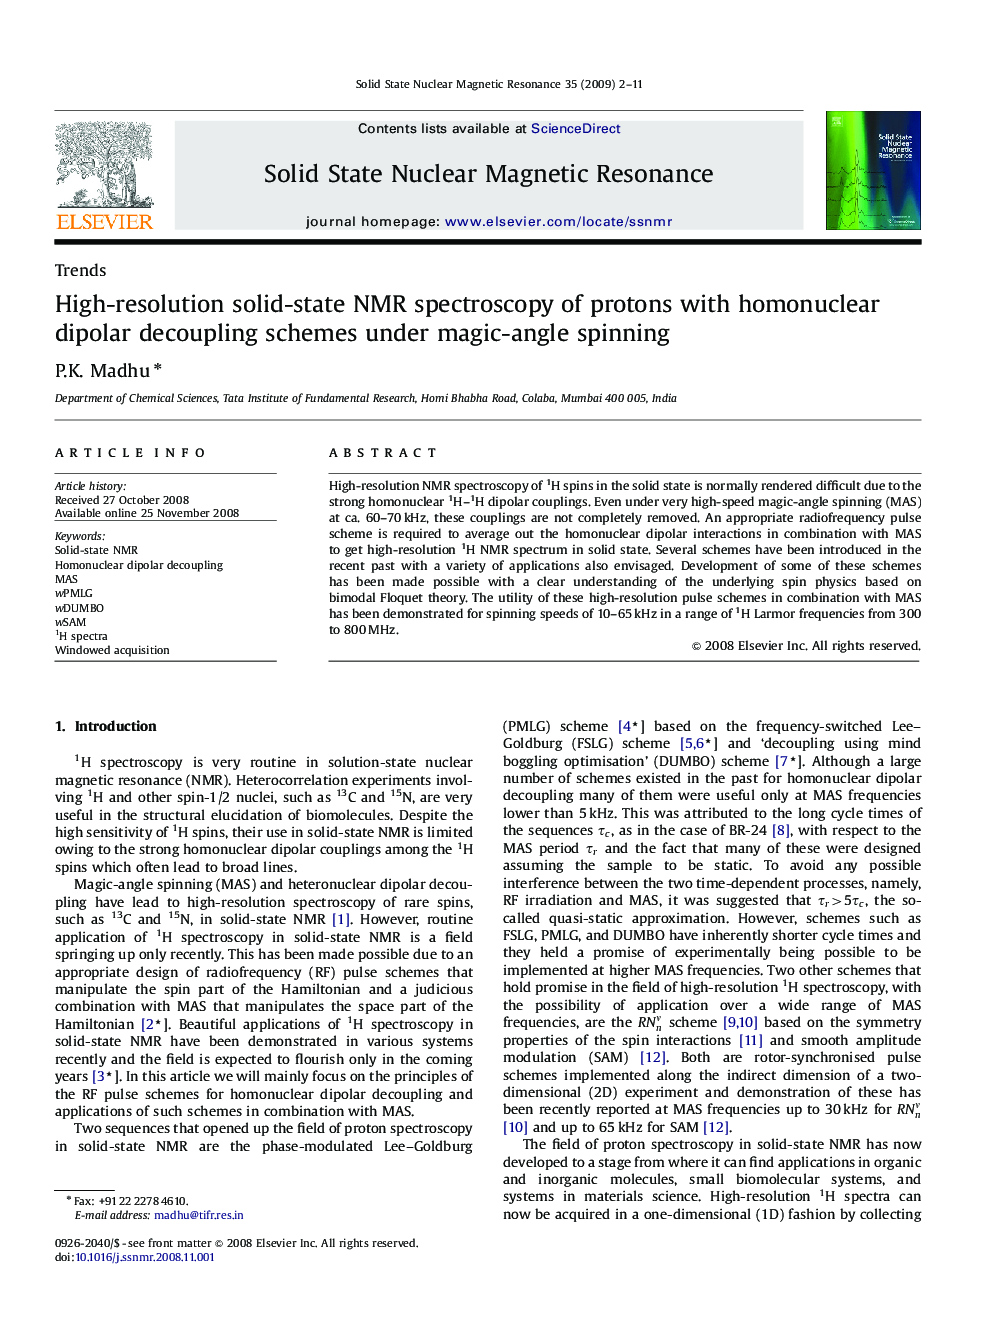 High-resolution solid-state NMR spectroscopy of protons with homonuclear dipolar decoupling schemes under magic-angle spinning